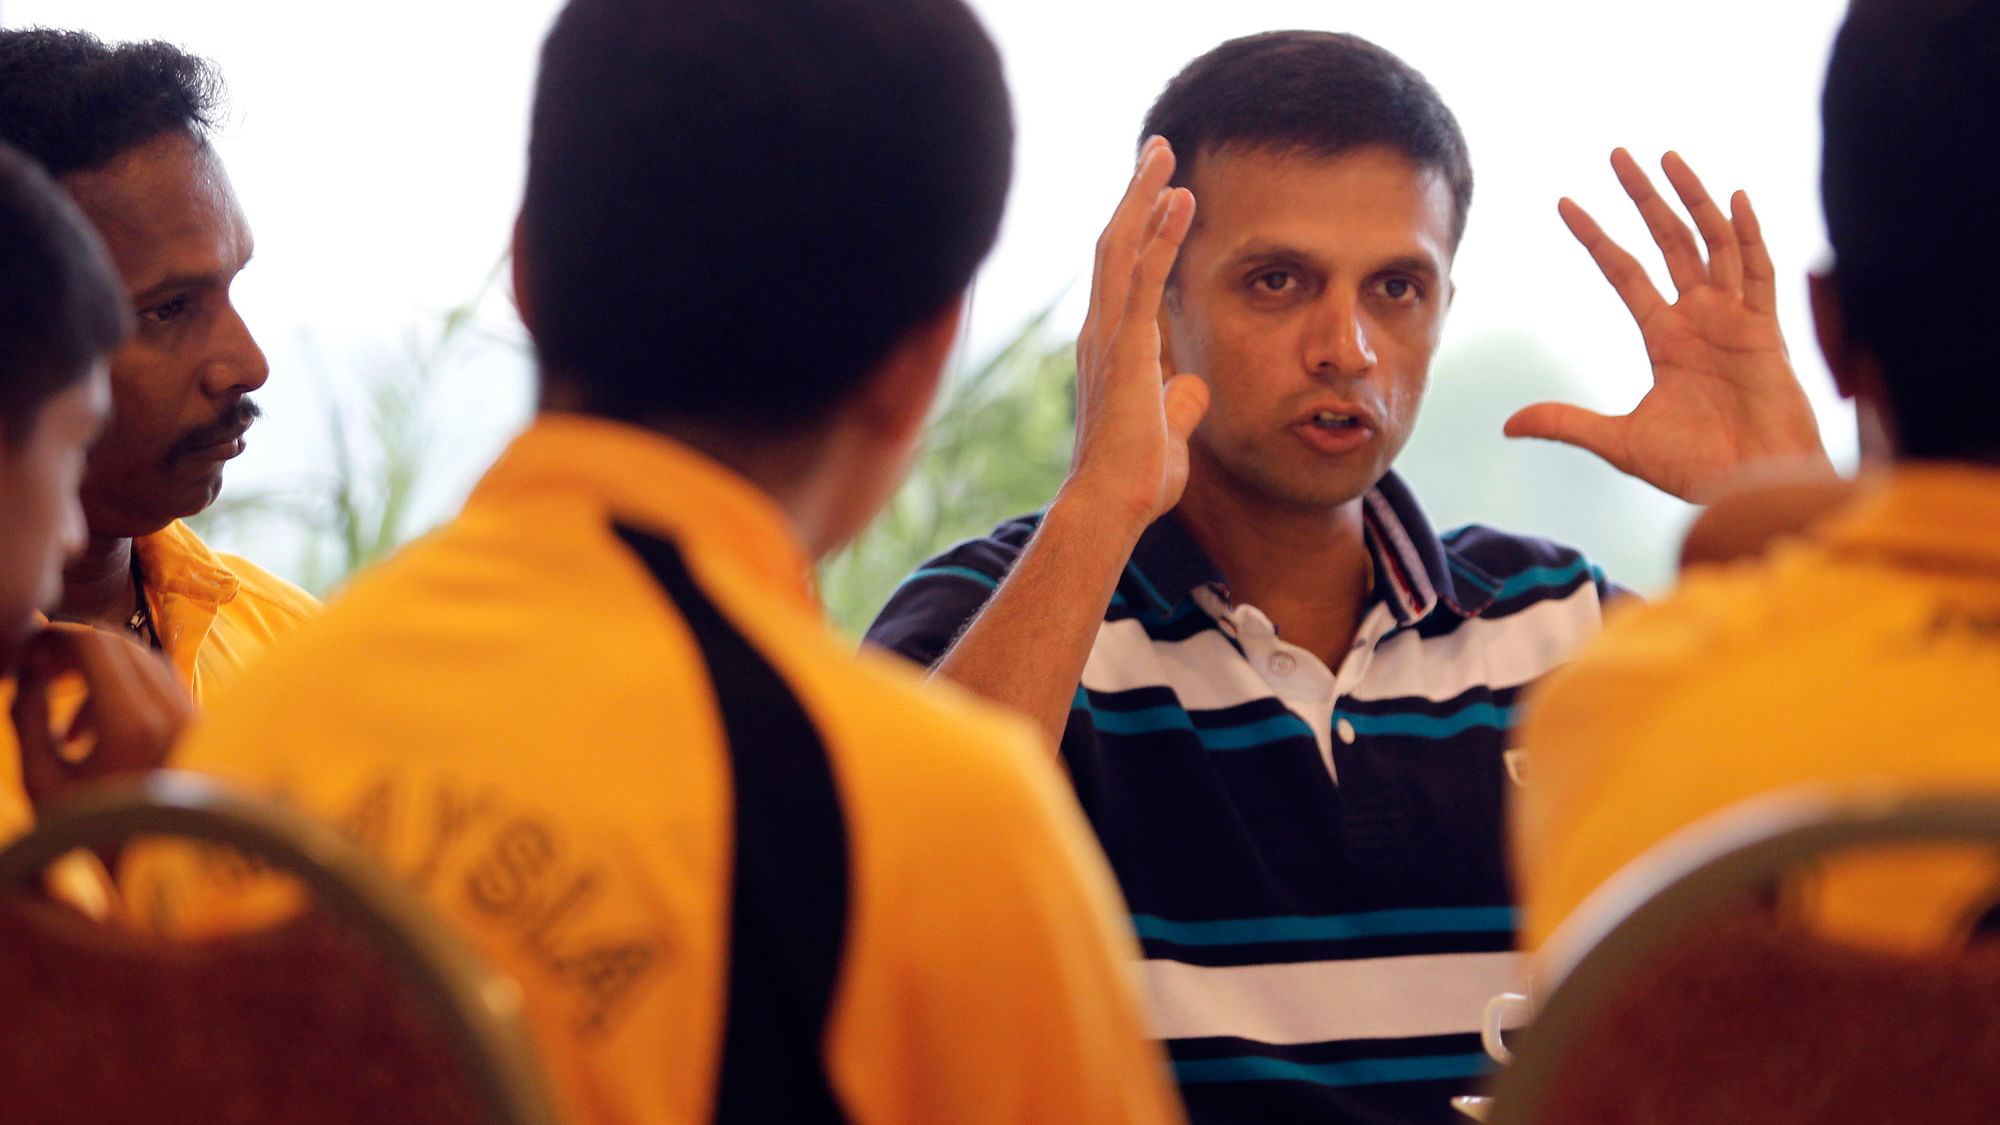 Rahul Dravid has now been named India’s Test overseas batting consultant. (Photo: Reuters)